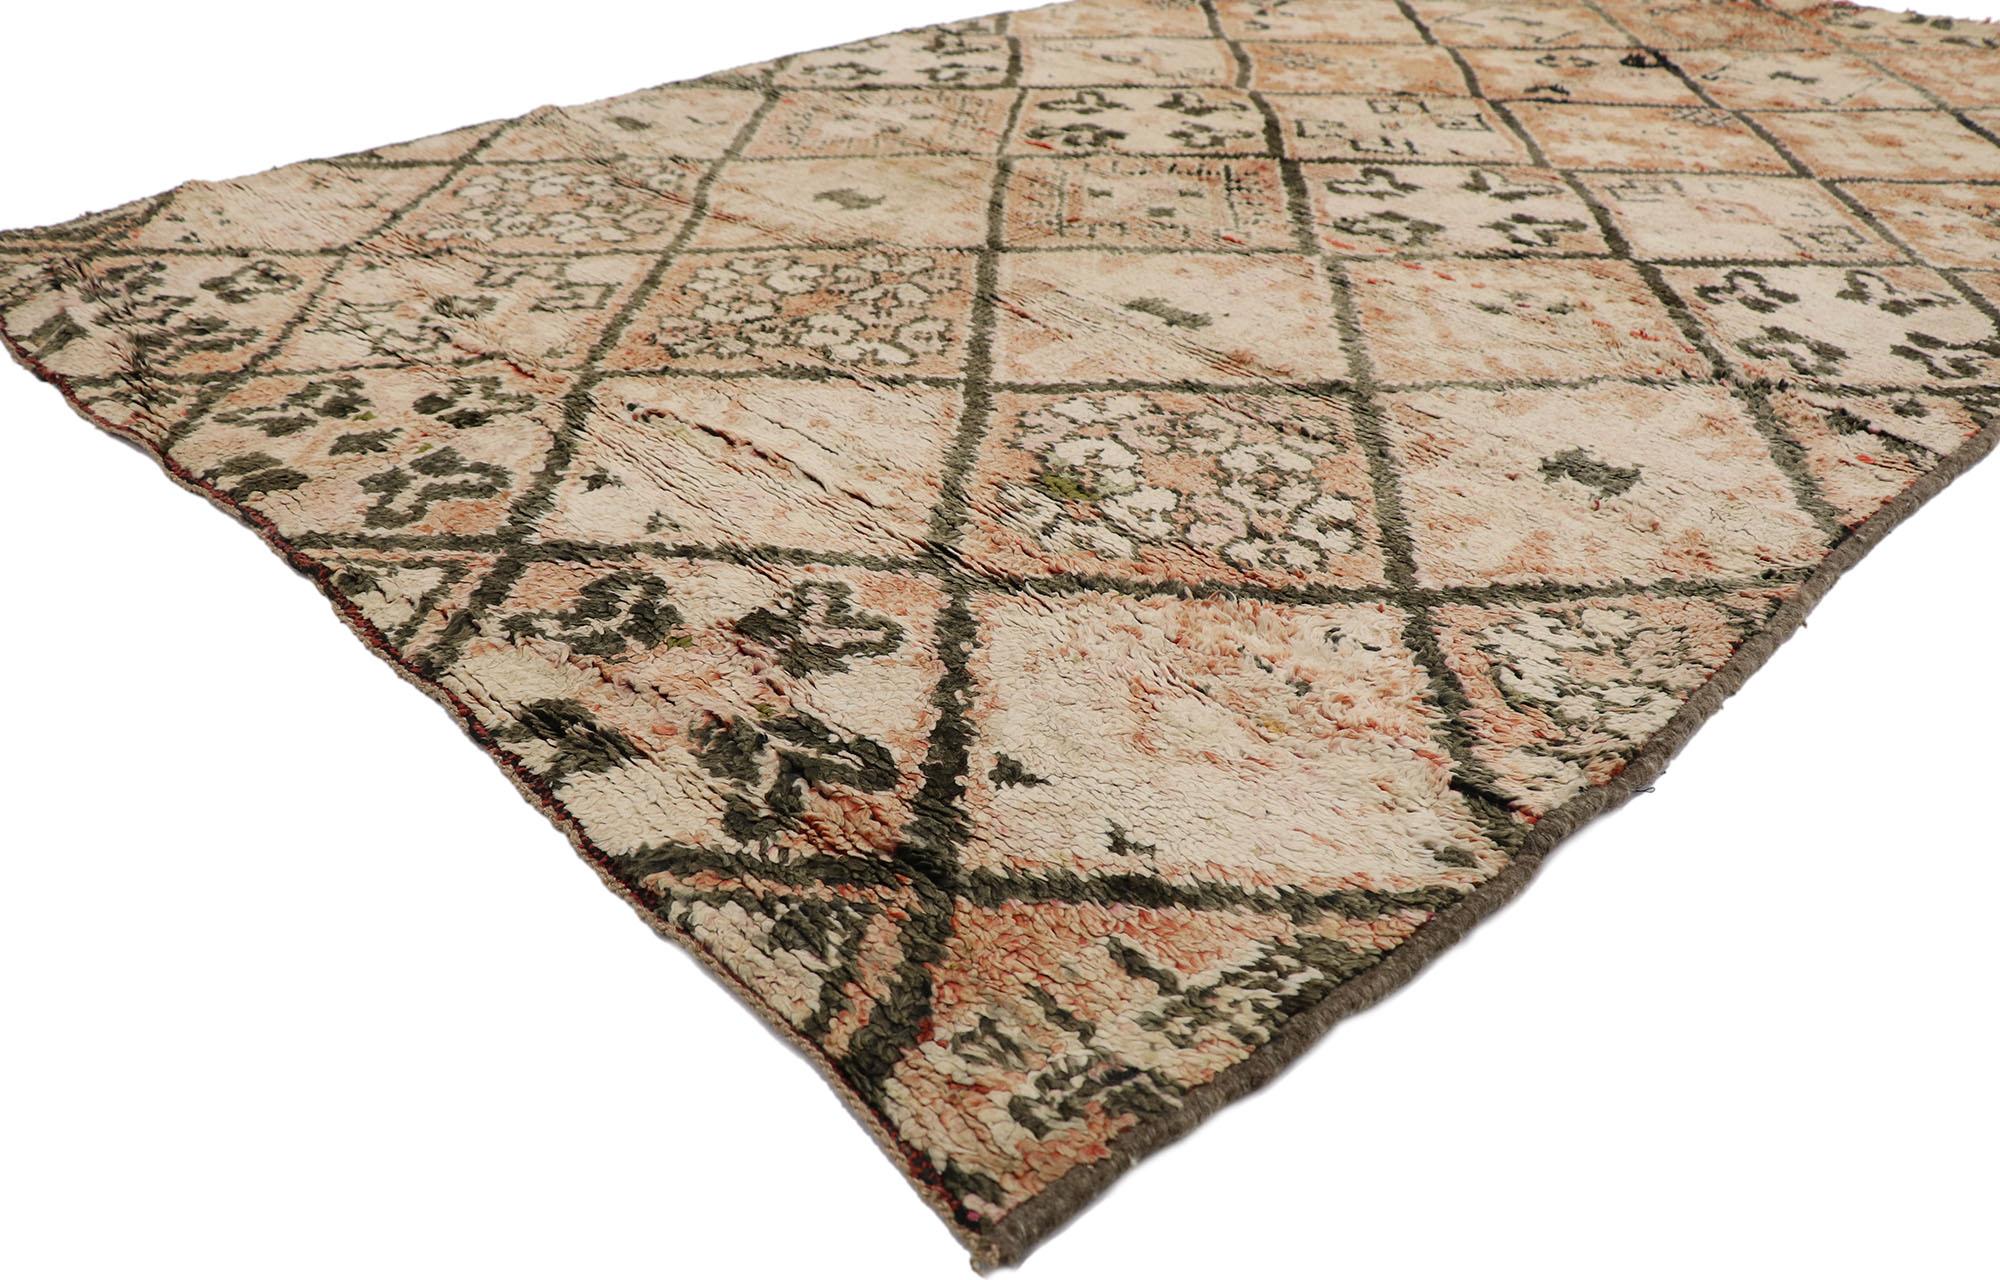 21340 Vintage Moroccan Beni Ourain rug, 05'07 x 09'02?.? Emanating nomadic charm with incredible detail and texture, this hand knotted wool vintage Beni Ourain Moroccan rug is a captivating vision of woven beauty. The eye-catching diamond trellis